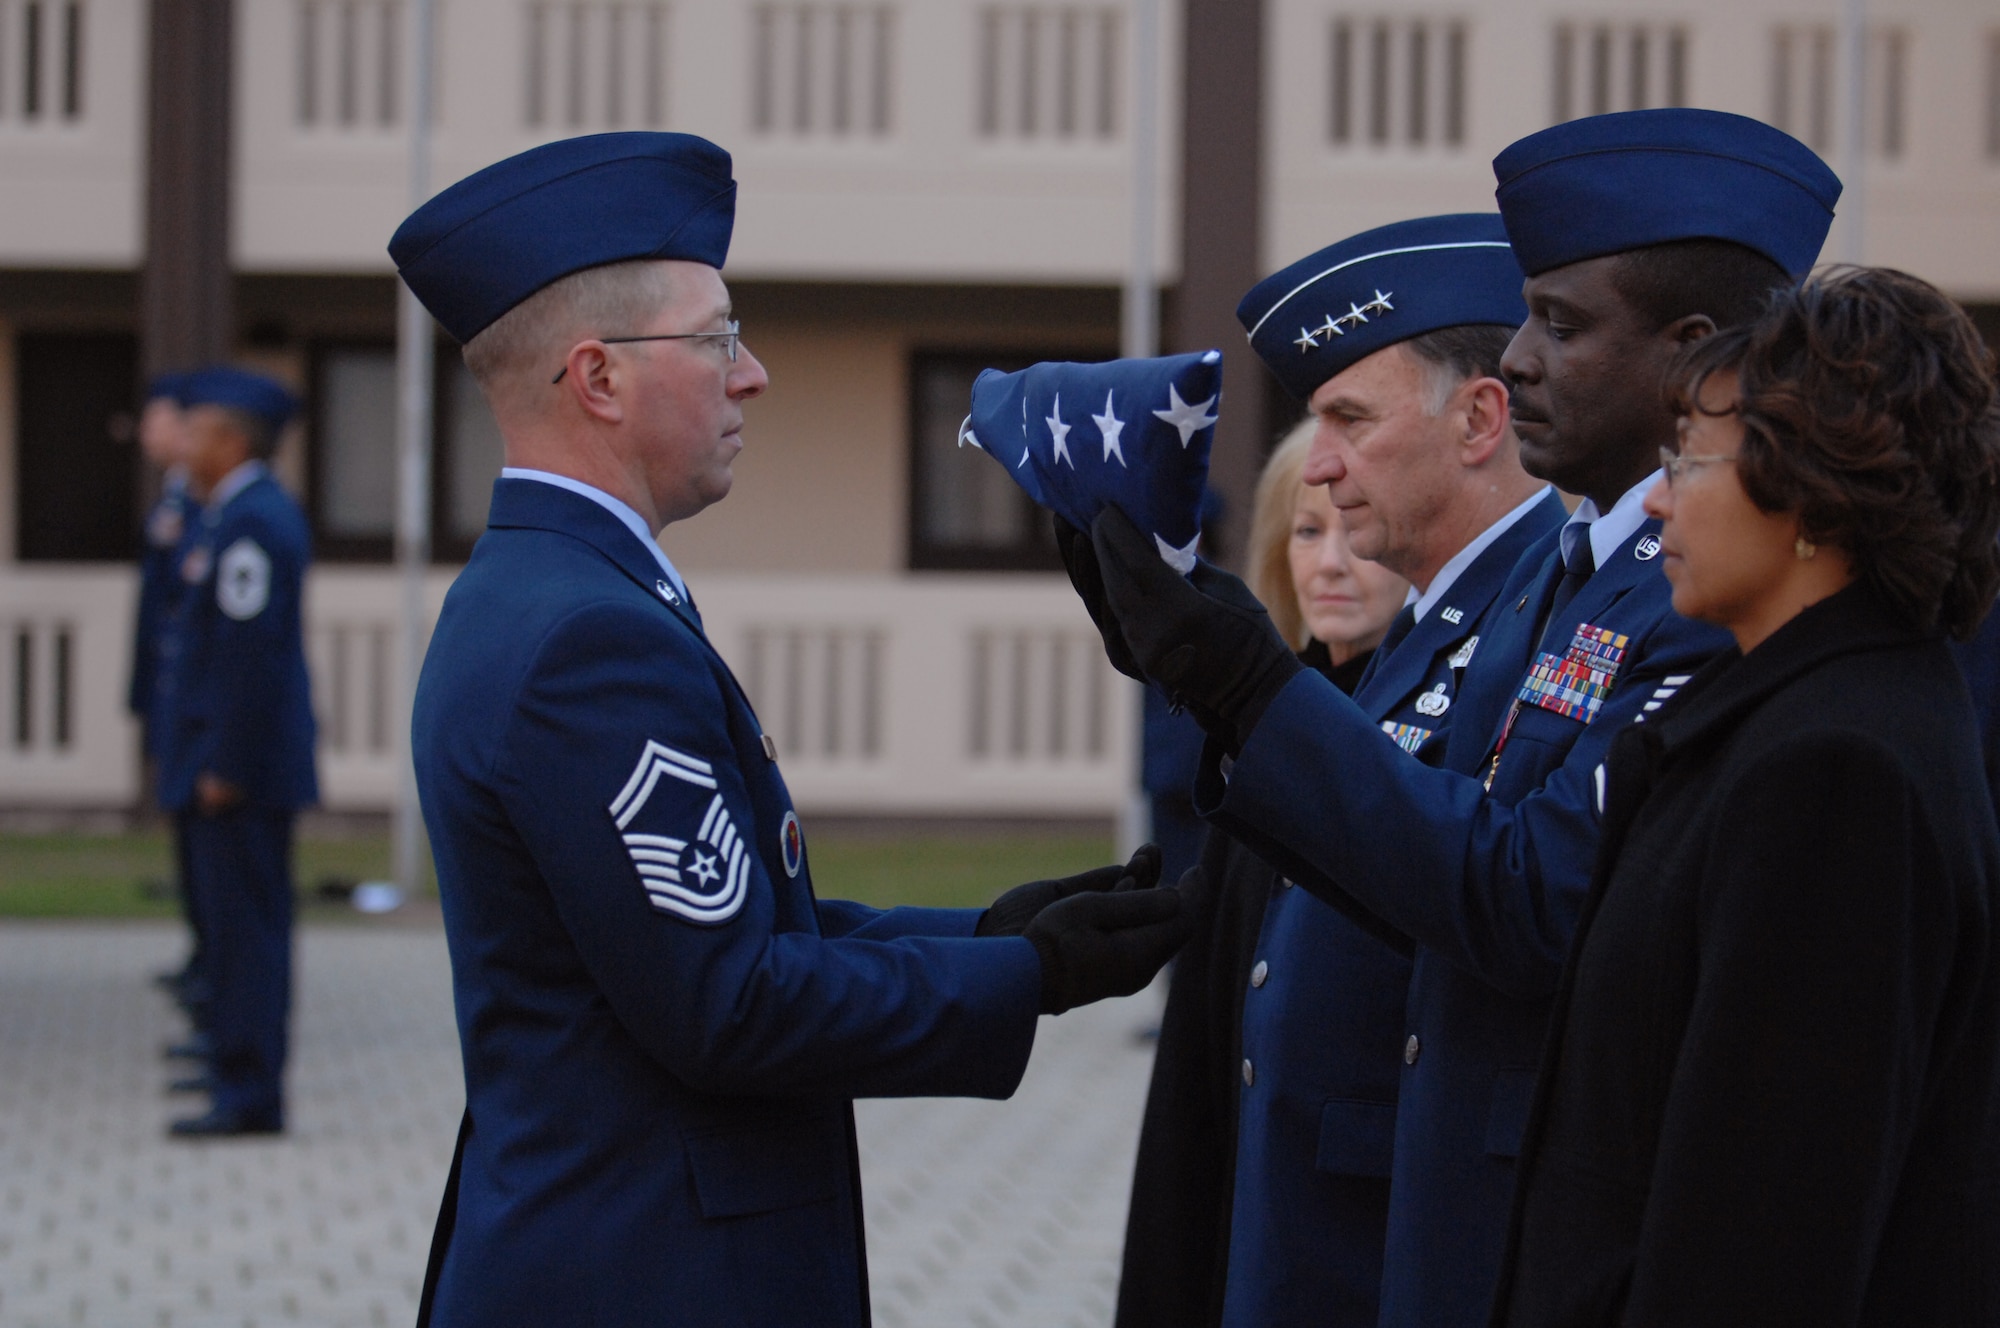 USAFE Command Chief Master Sergeant Gary G. Coleman returns the U.S Flag during a retreat ceremony at the Kisling Non-commisioned Officer Academy drill pad at Kapaun Air Station, Germany following a retirement ceremony in his honor for 30 years of military service.  The chief’s retirement is effective May 1, 2008. (U.S. Air Force photo by Tech Sgt. Corey Clements)